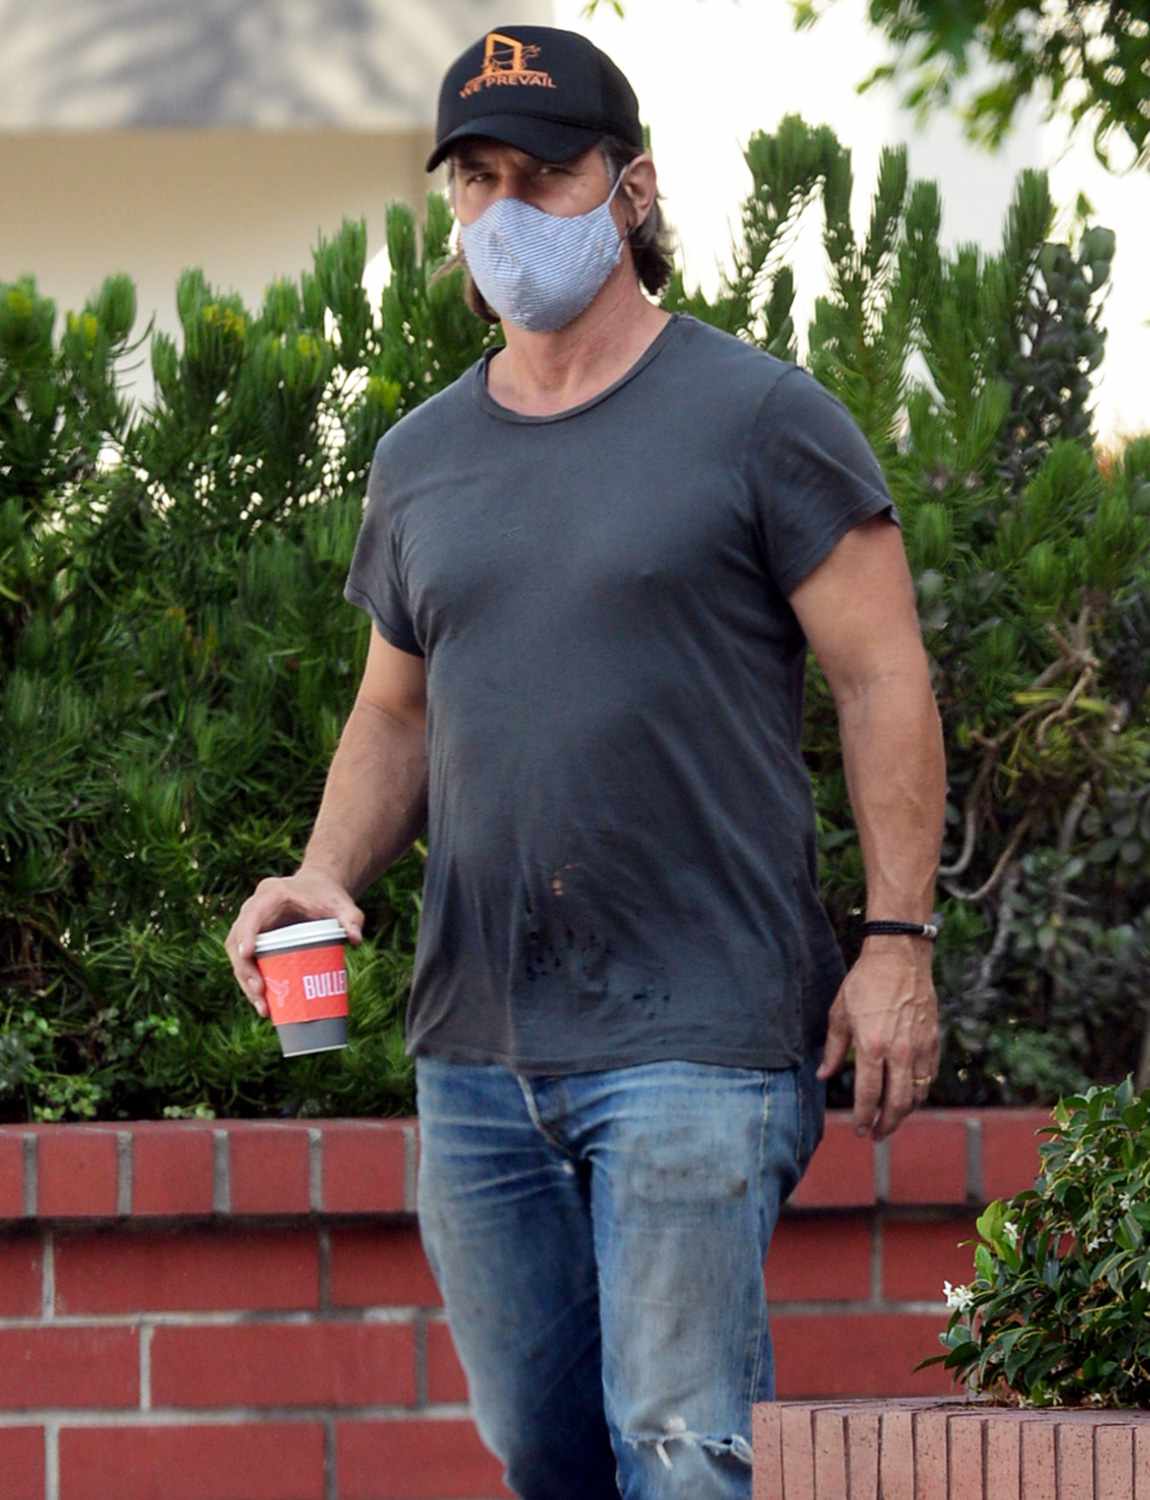 Josh Brolin Spotted Wearing A PPE Mask As He Grabs Some Coffee At Bulletproof Cafe In Venice, Ca